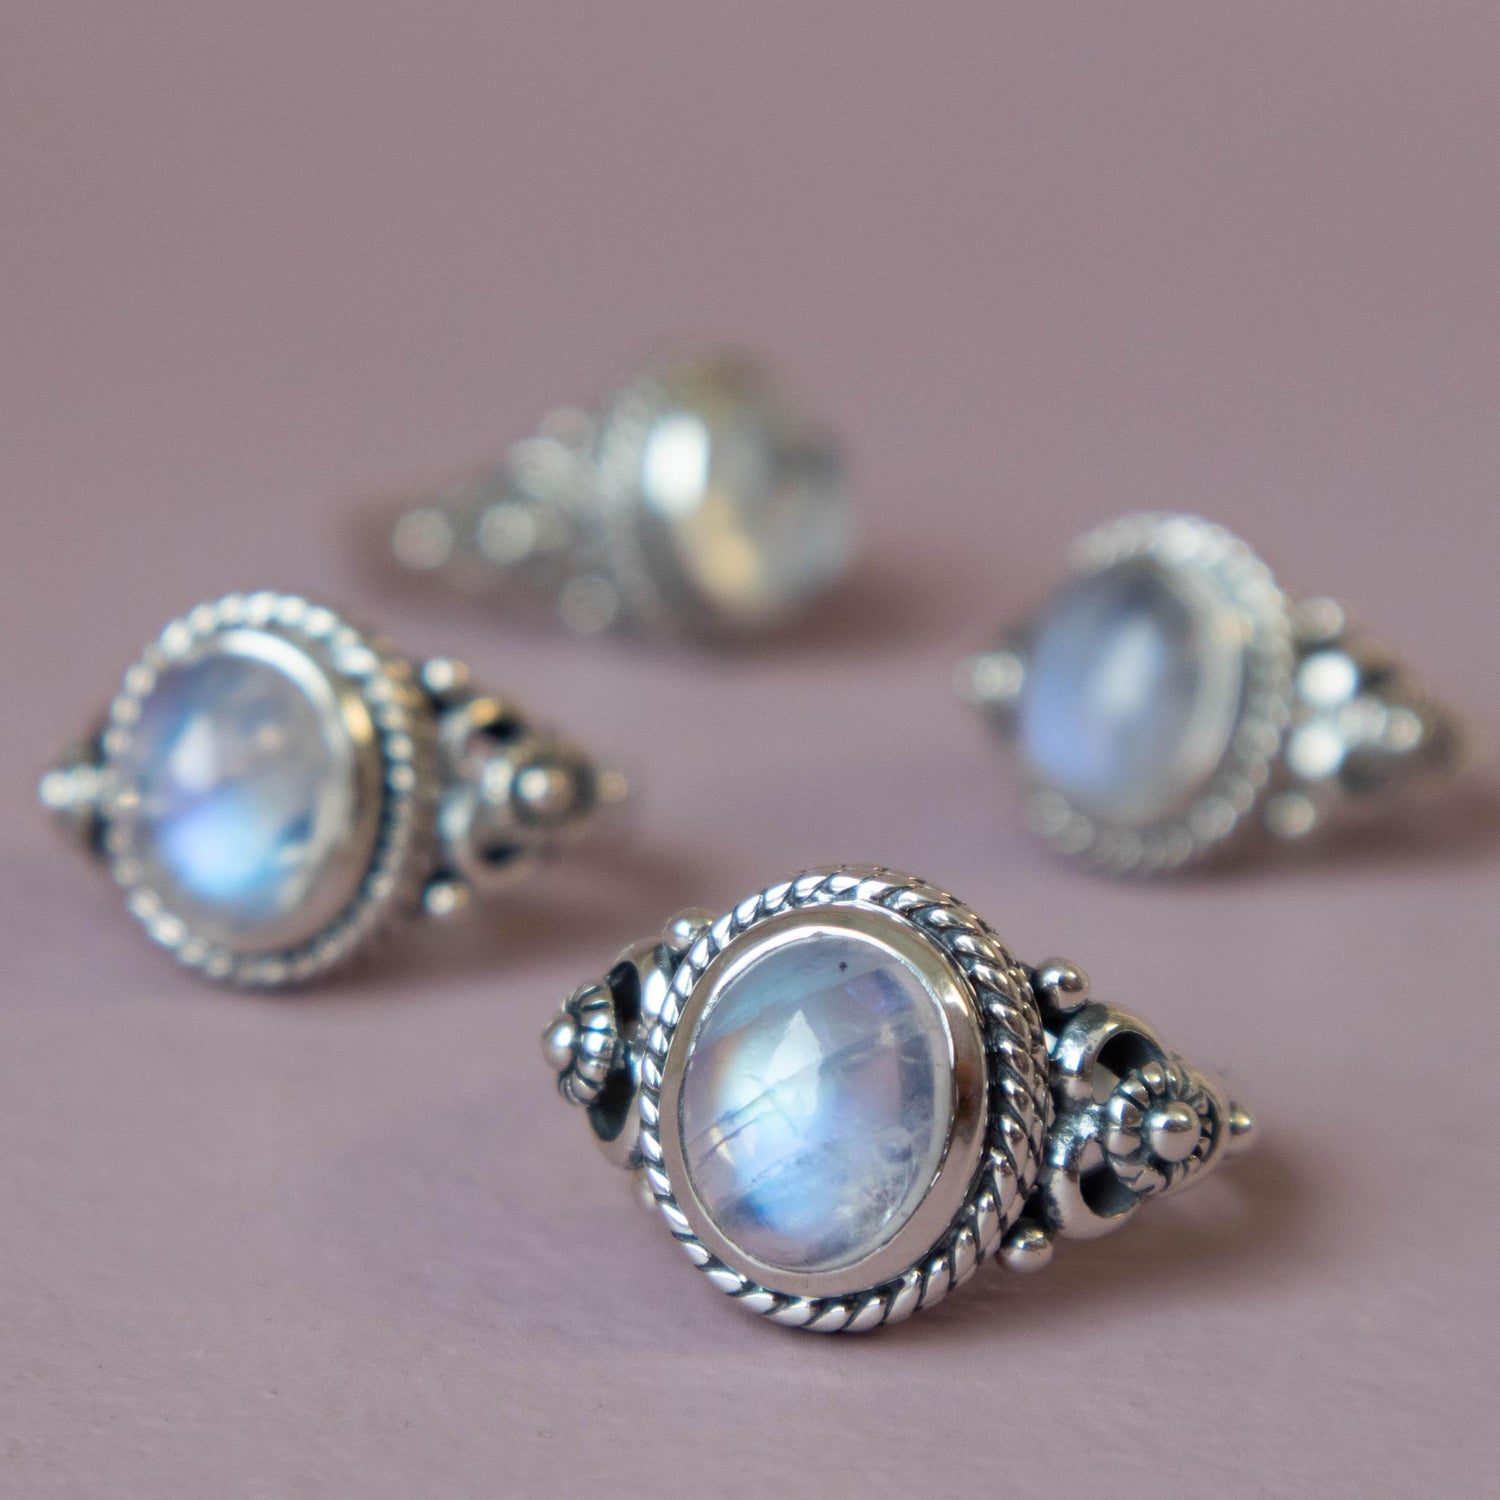 rainbow moonstone, rainbow moonstone ring, rainbow moonstone jewelry, crystal ring, crystal jewelry, rainbow moonstone sterling silver ring, rainbow moonstone crystal, rainbow moonstone stone, rainbow moonstone properties, rainbow moonstone healing properties, rainbow moonstone metaphysical properties, rainbow moonstone meaning, moonstone, moonstone ring, moonstone jewelry, moonstone crystal, moonstone properties, moonstone healing properties, moonstone meaning